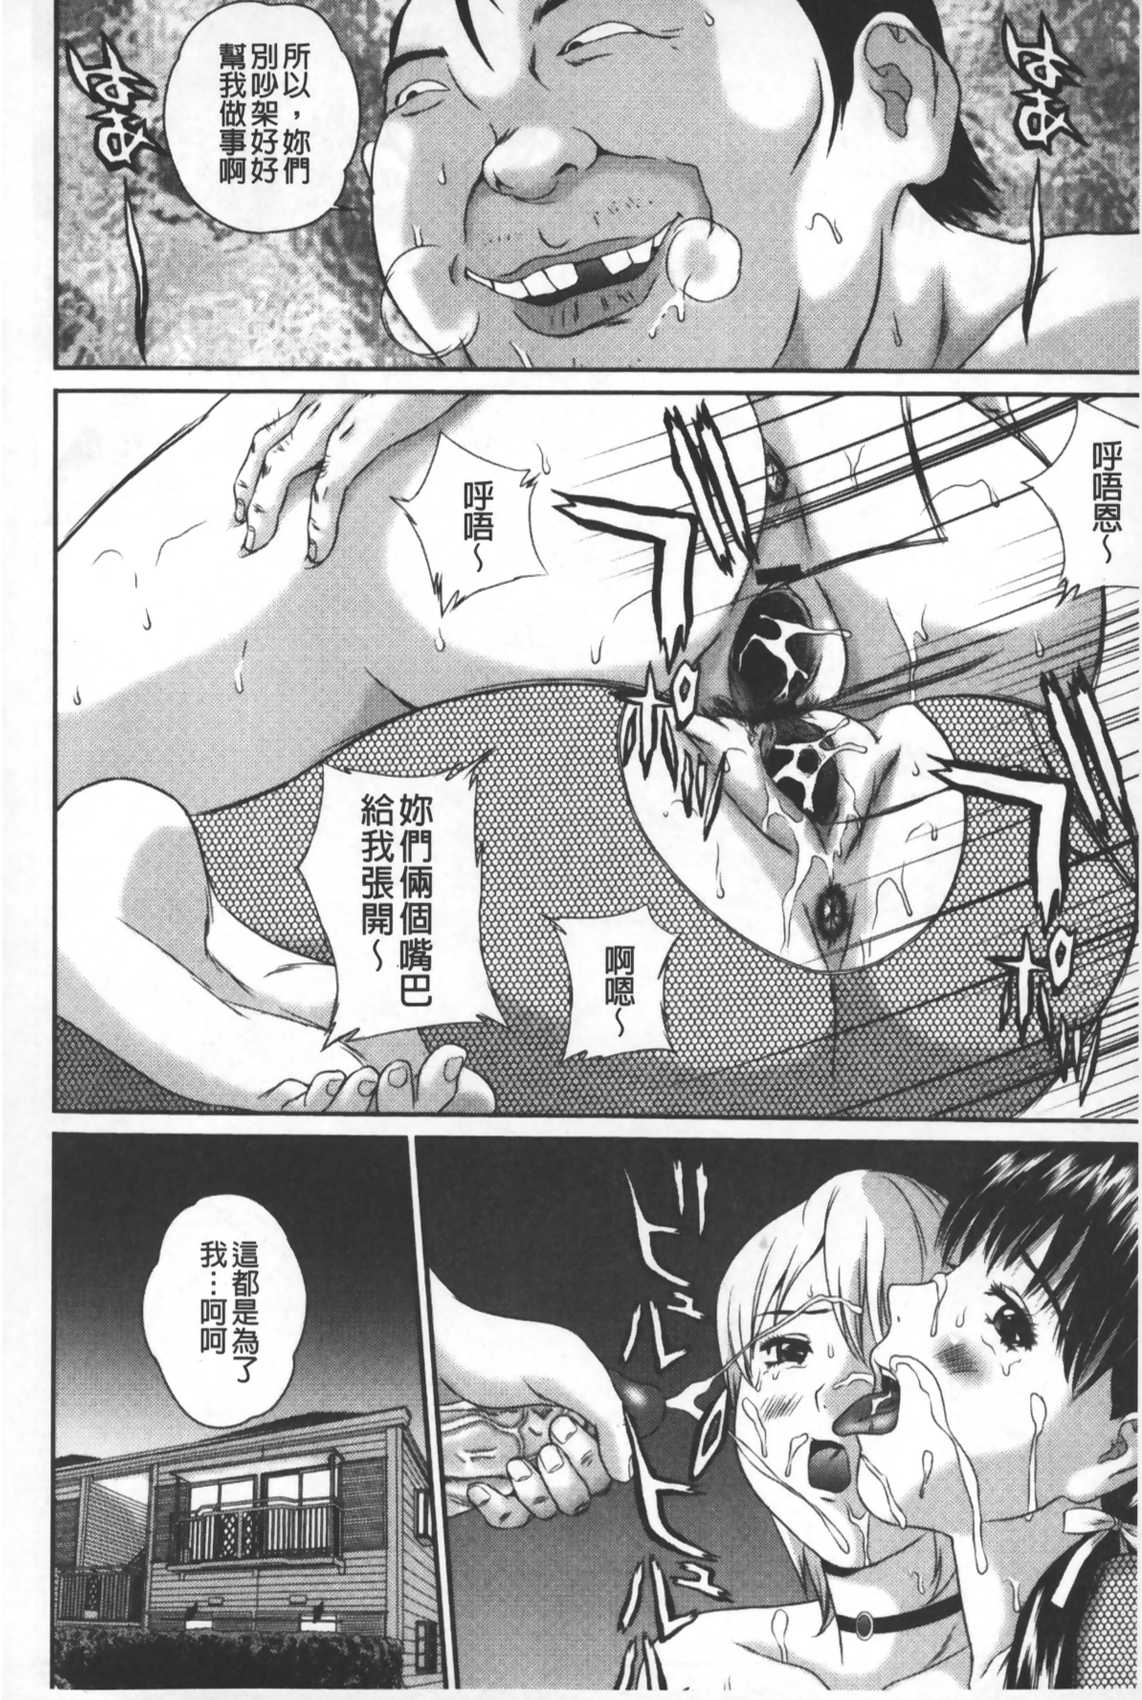 [Manzou] Tousatsu Collector | 盜拍題材精選集 [Chinese] page 41 full